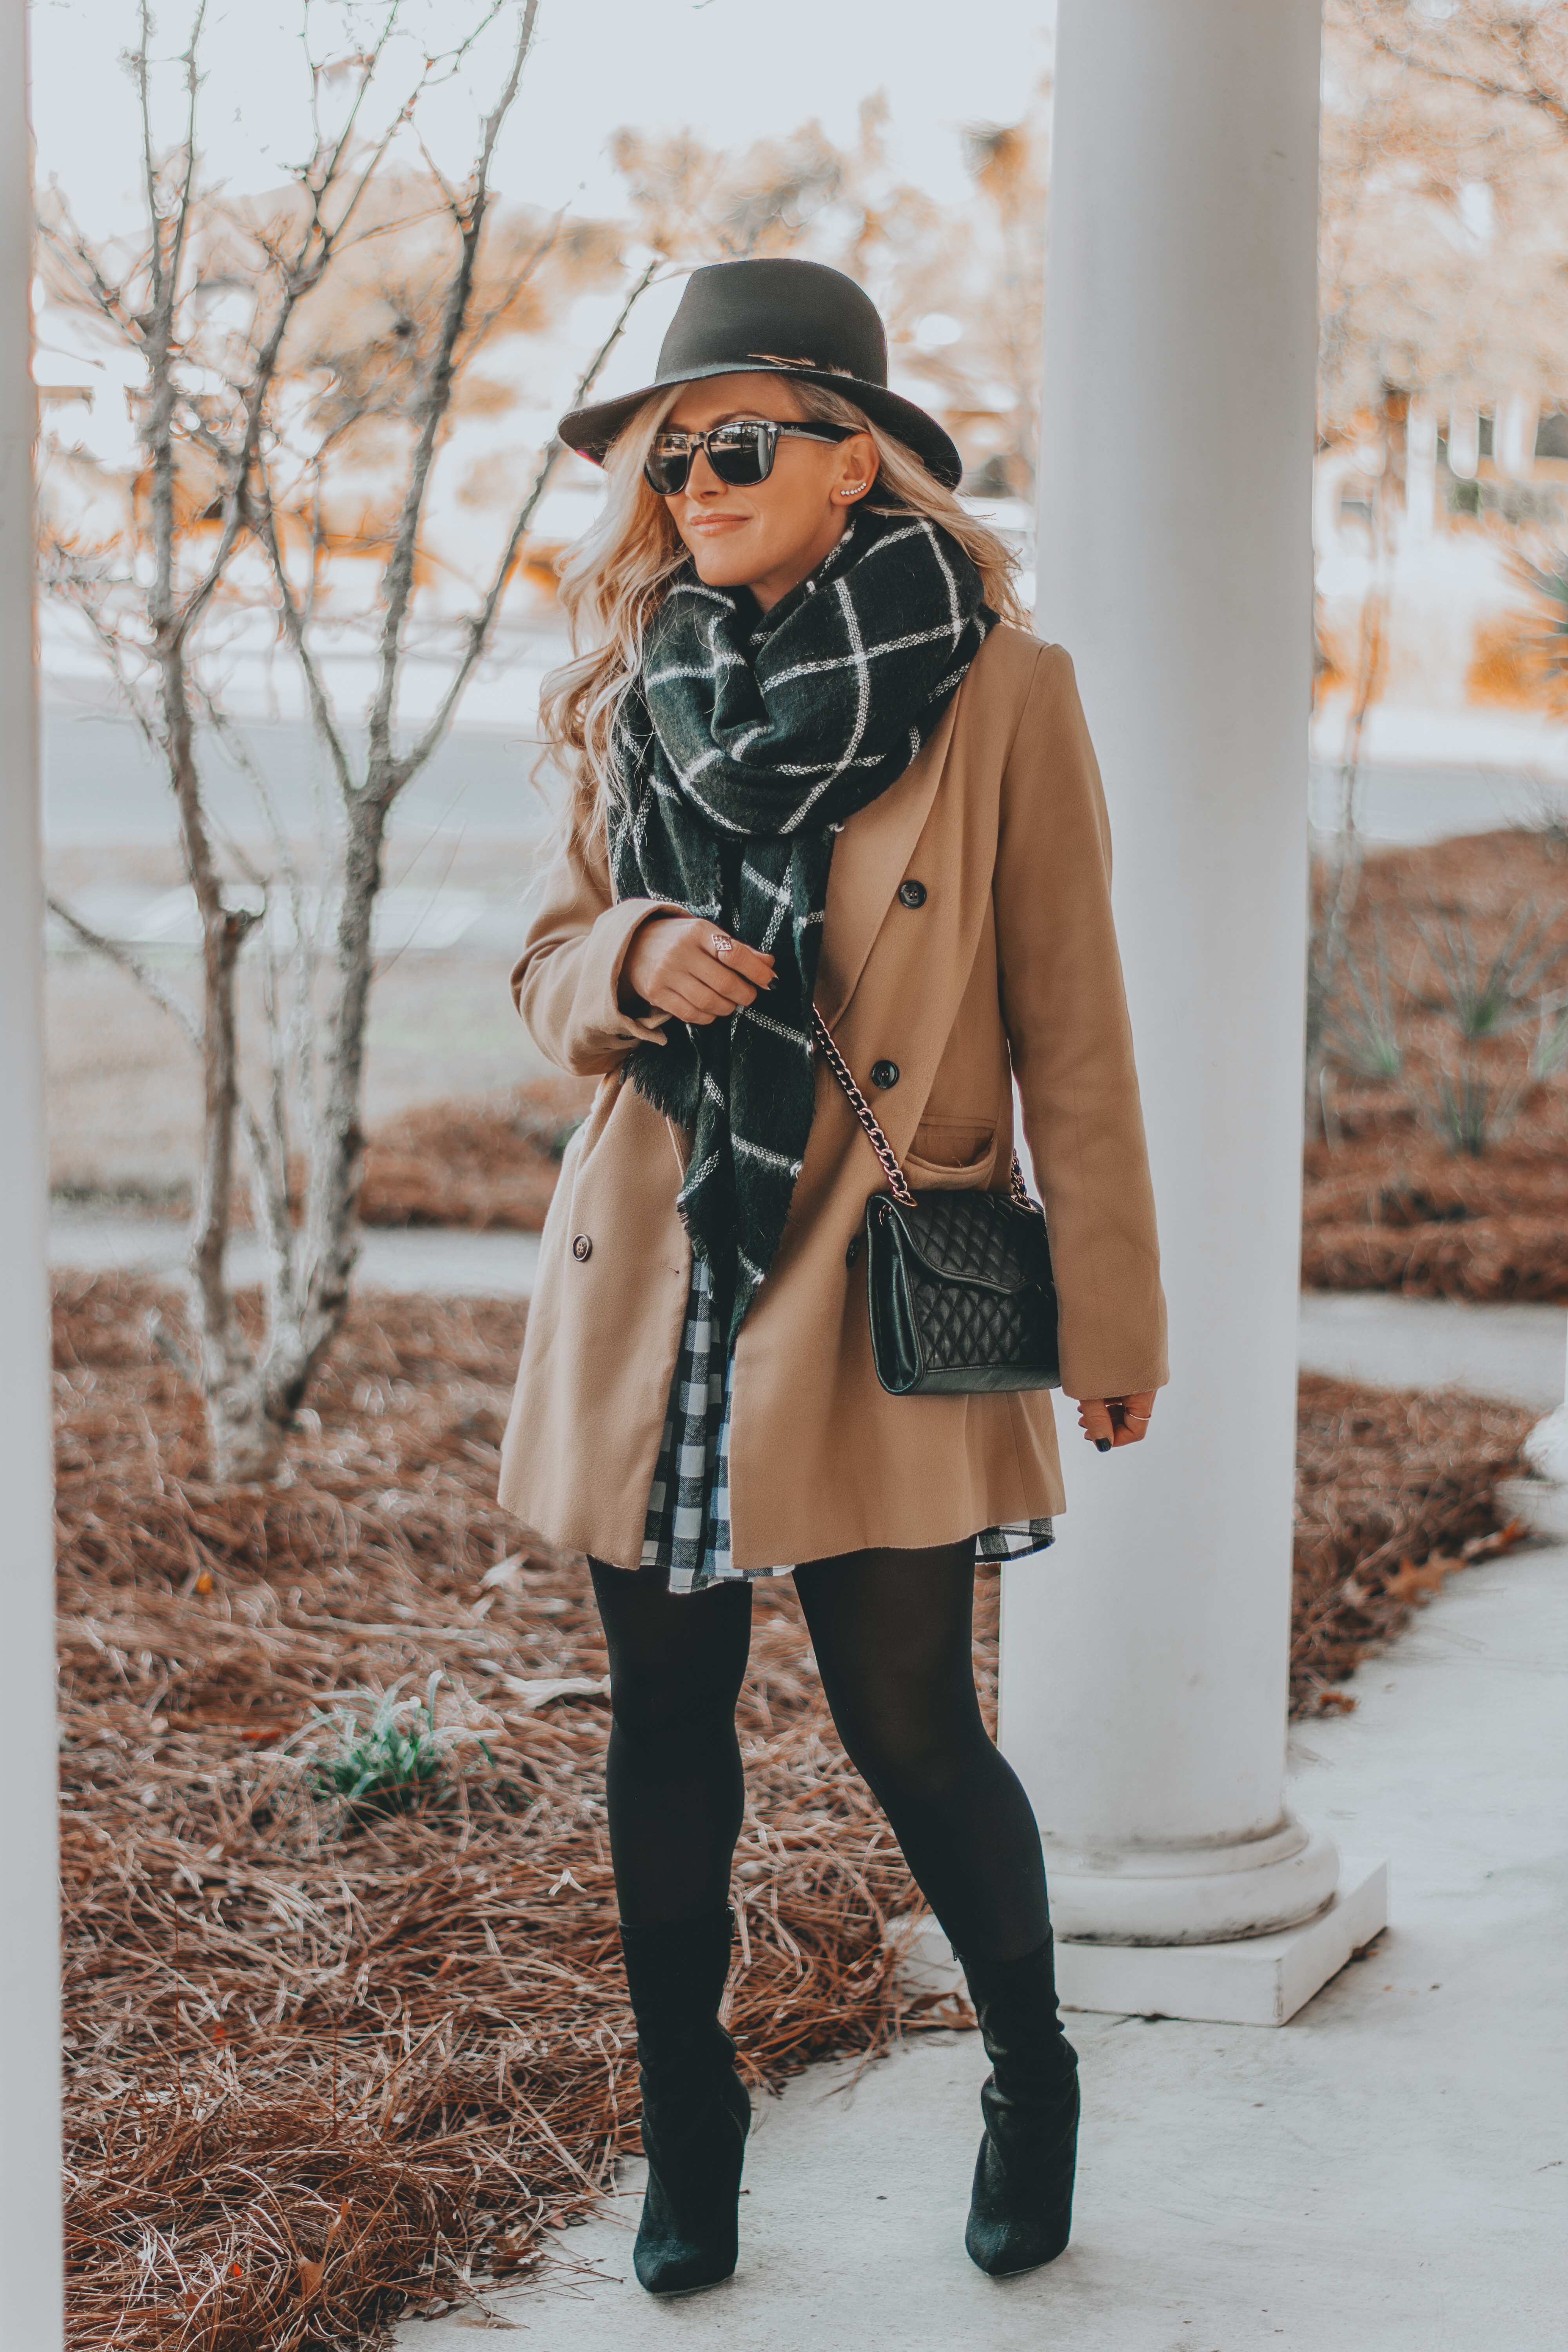 New Year, New Goals | What I Plan to Focus on in 2019 : sharing my budget friendly black and white plaid dress and camel coat ootd, as well as my 2019 new year goals. BreeAtLast.com